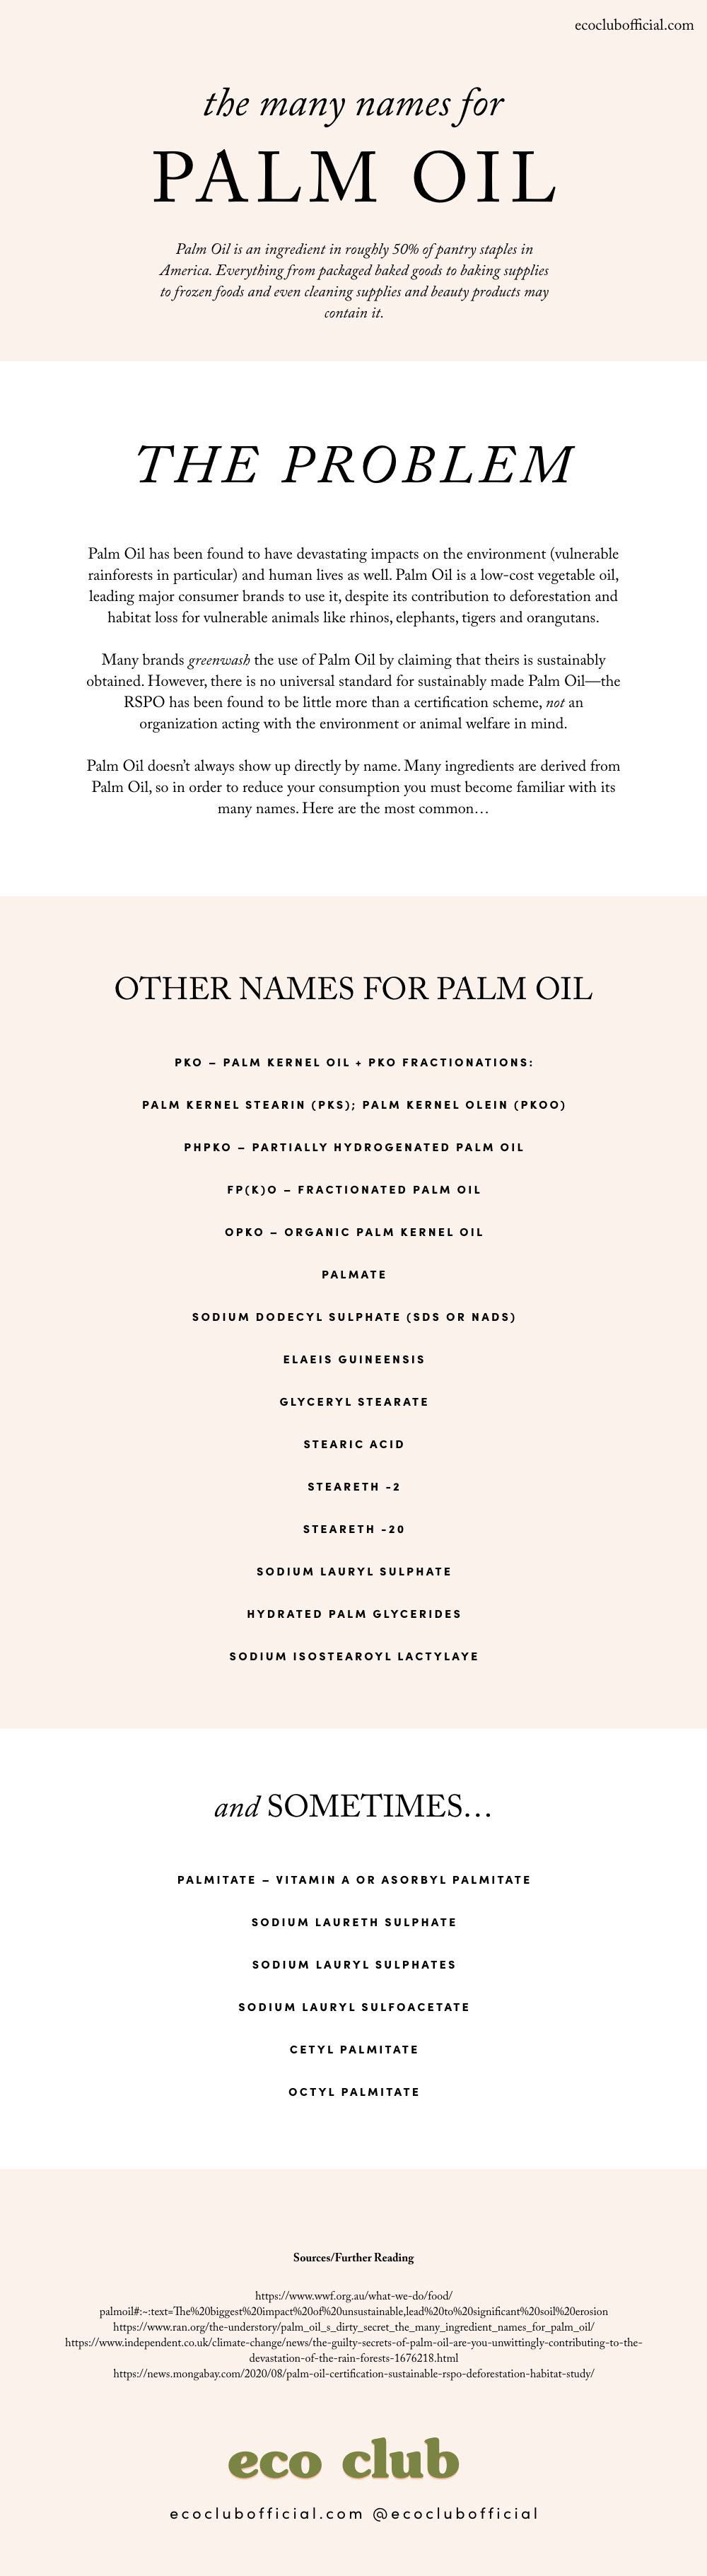 Names For Palm Oil - How to reduce the use of palm oil